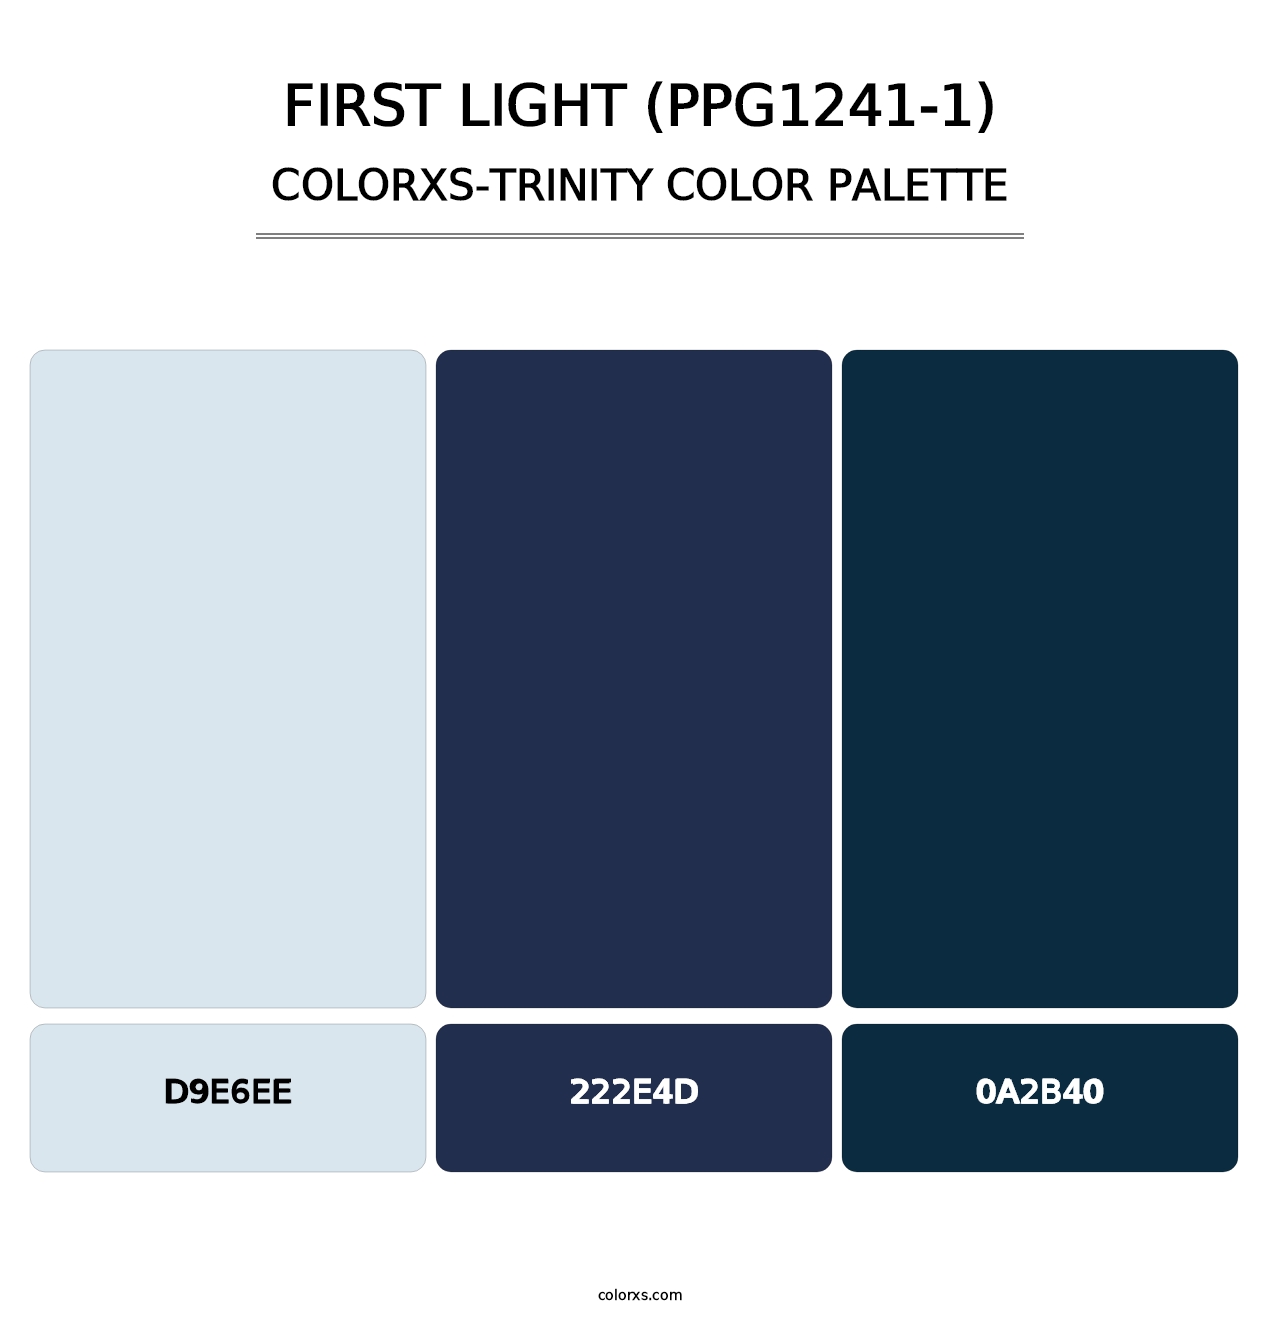 First Light (PPG1241-1) - Colorxs Trinity Palette